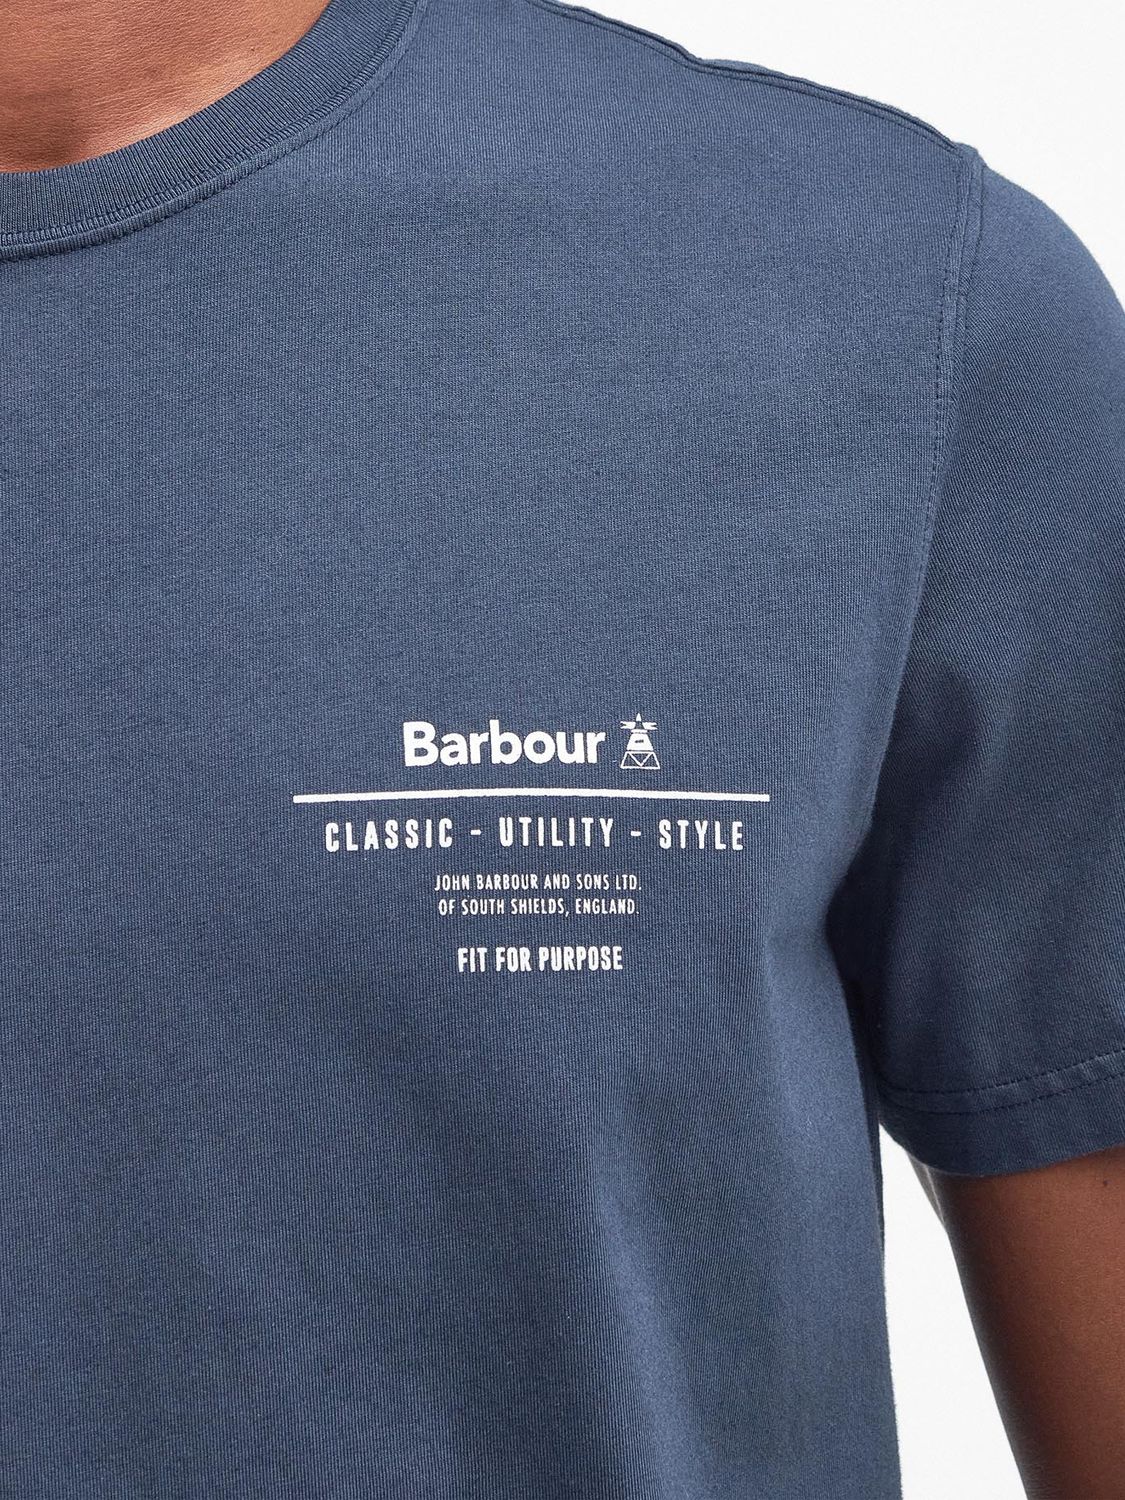 Barbour Hickling T-Shirt, Navy, M